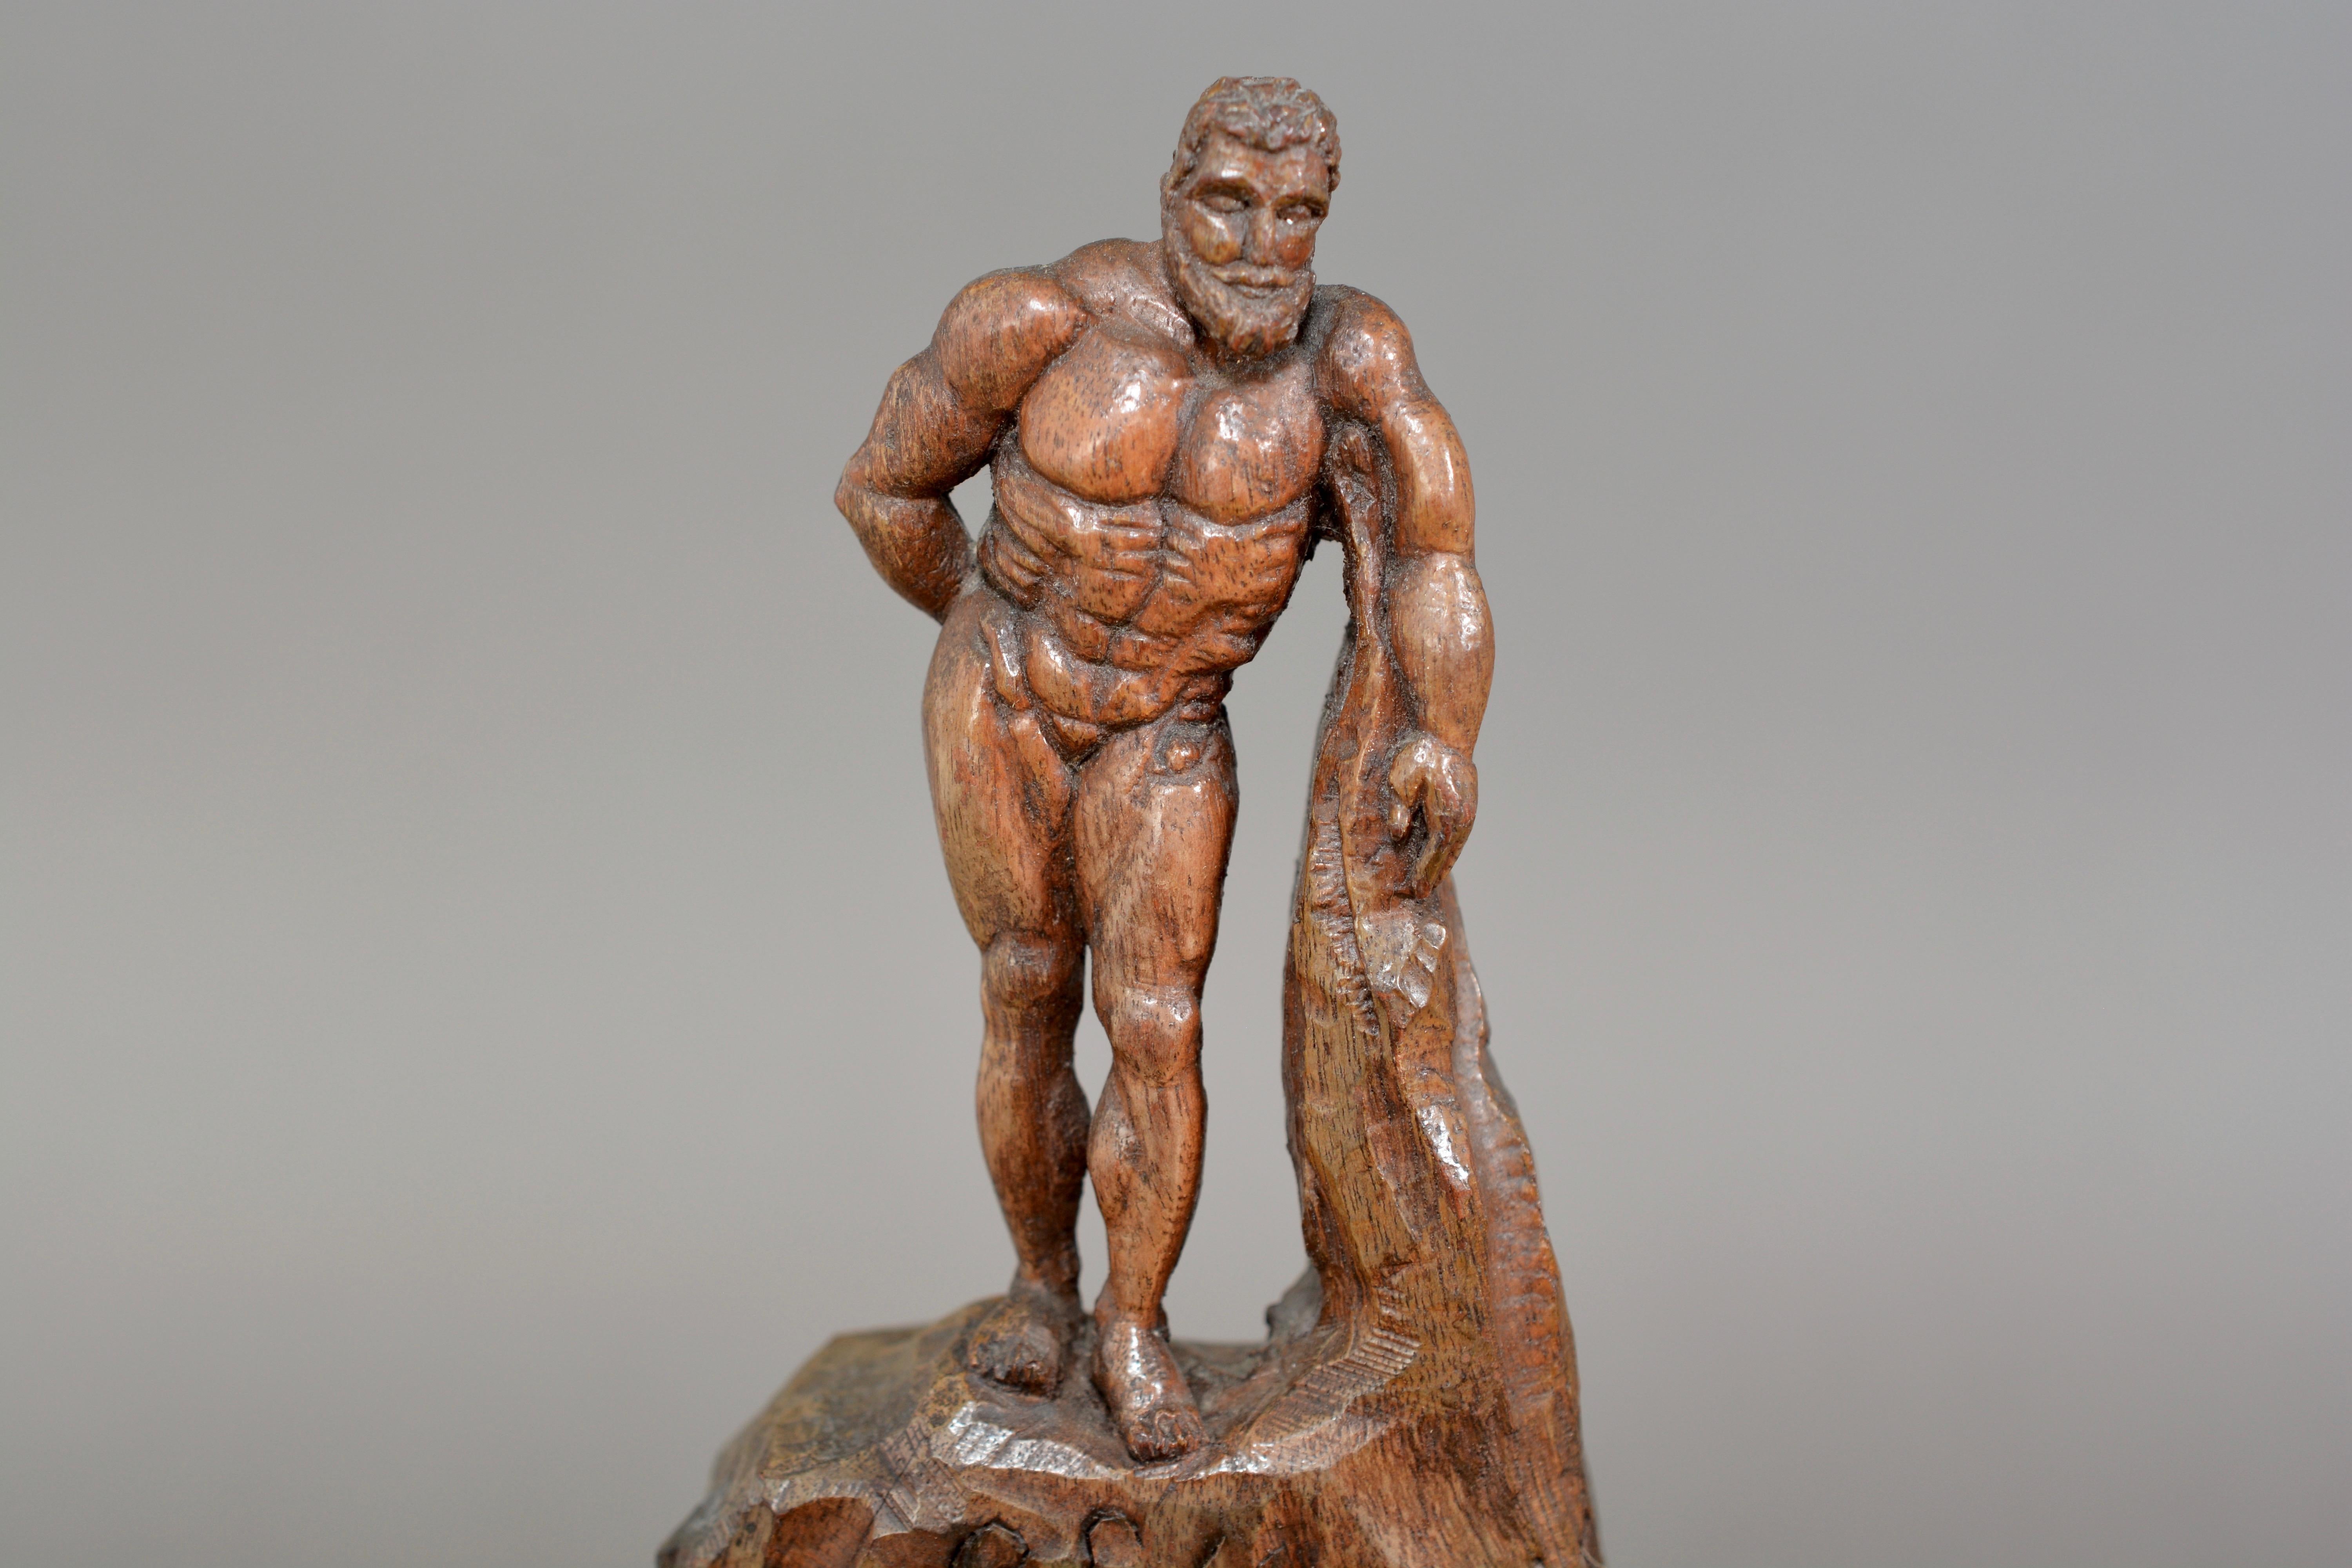 A charming antique wood carving of Hercules. Dating from circa 1900, hand carved from olivewood or fruitwood probably of Italian origin. Very nice original colour and patination. 15.4cms tall and 7.3cms wide.